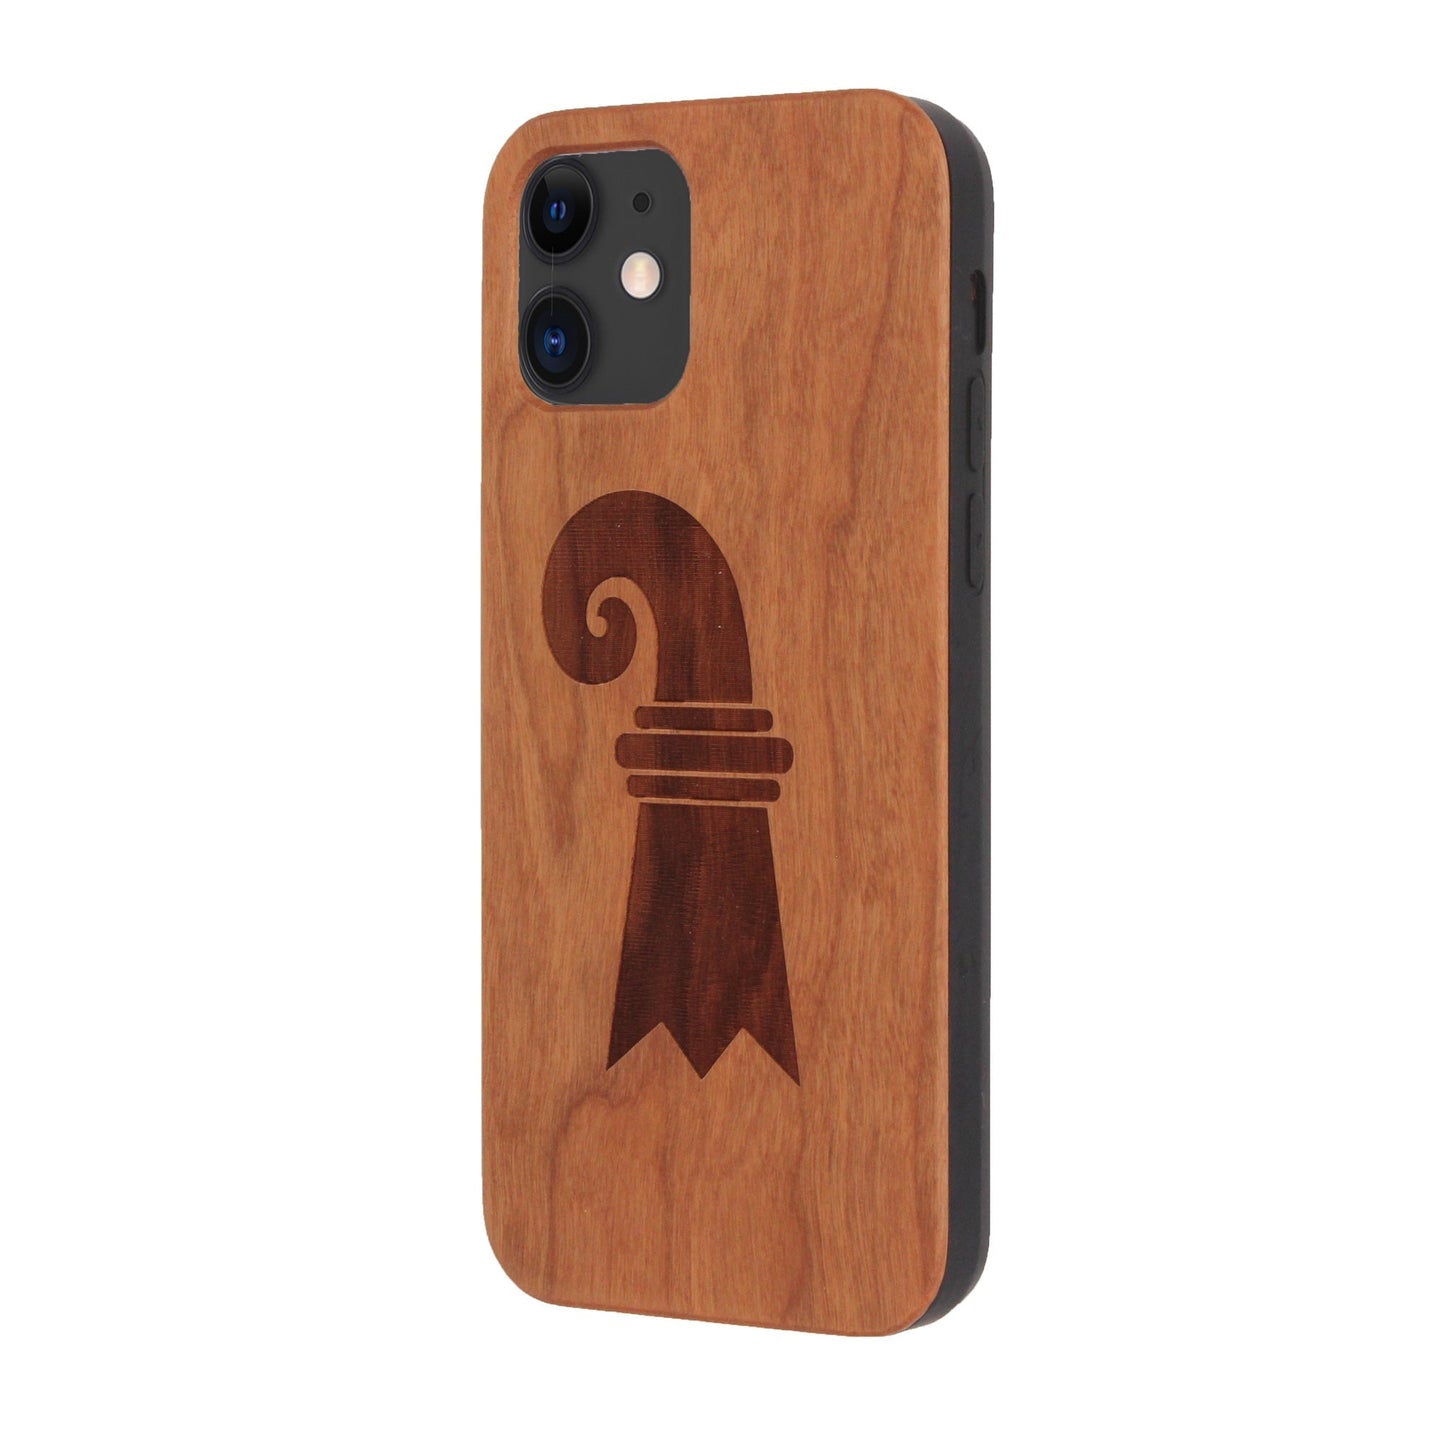 Baslerstab Eden case made of cherry wood for iPhone 11